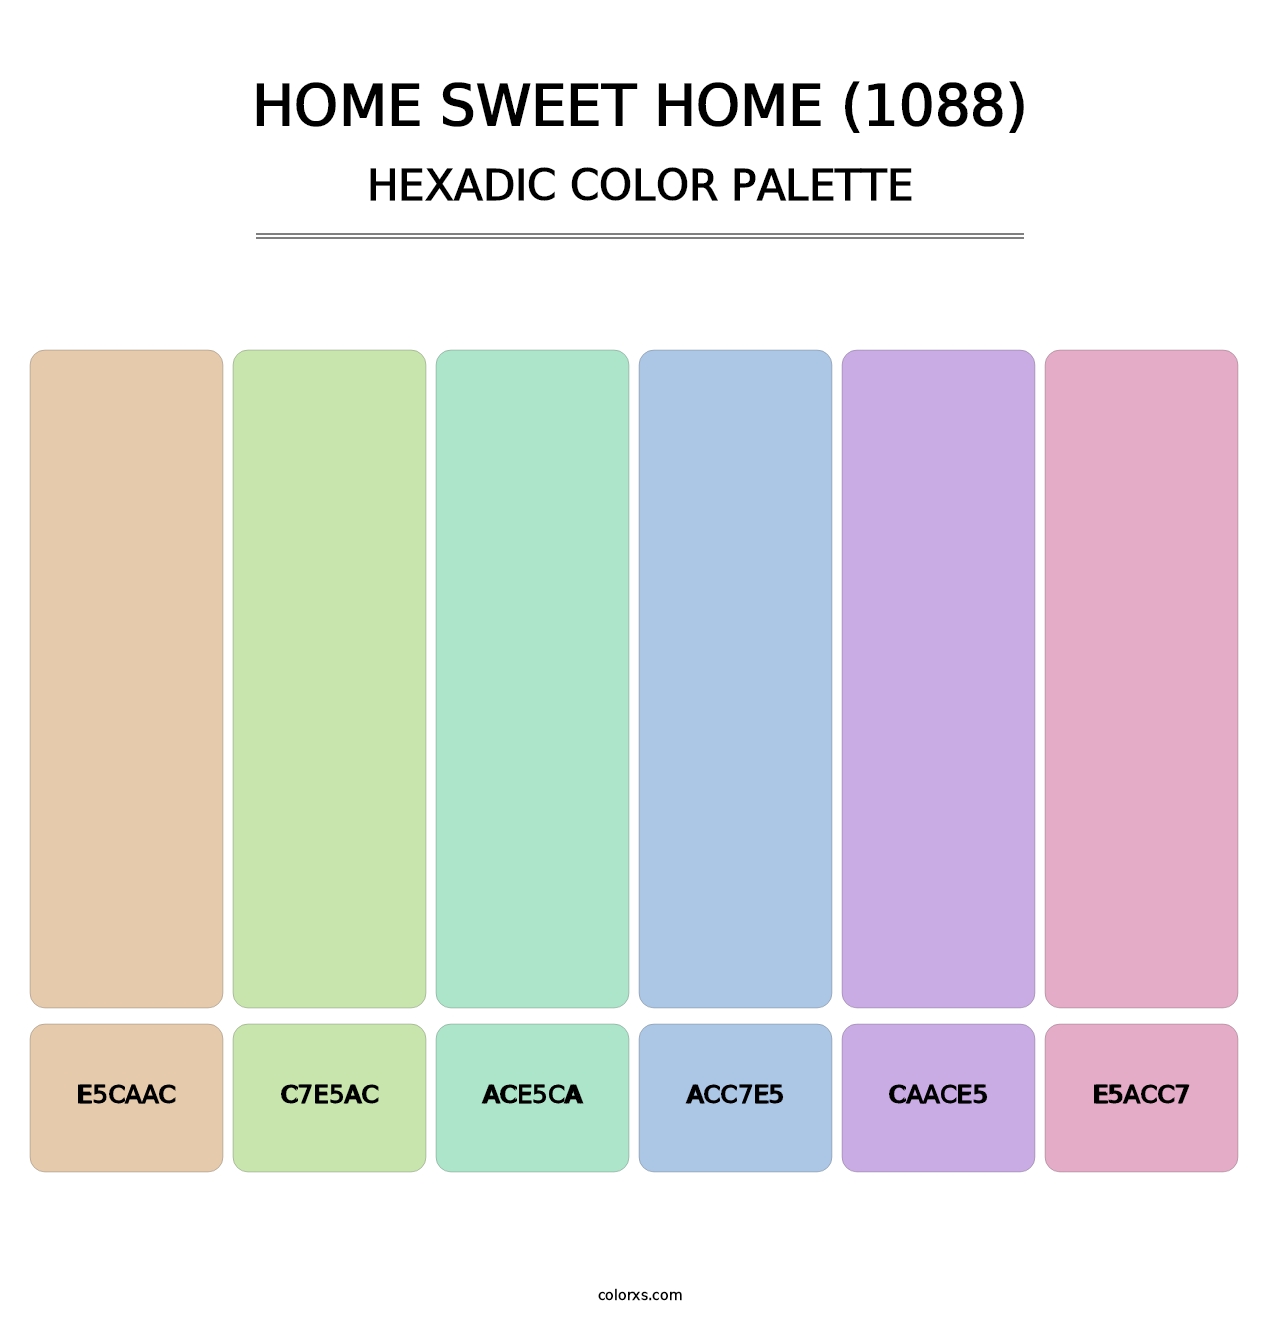 Home Sweet Home (1088) - Hexadic Color Palette